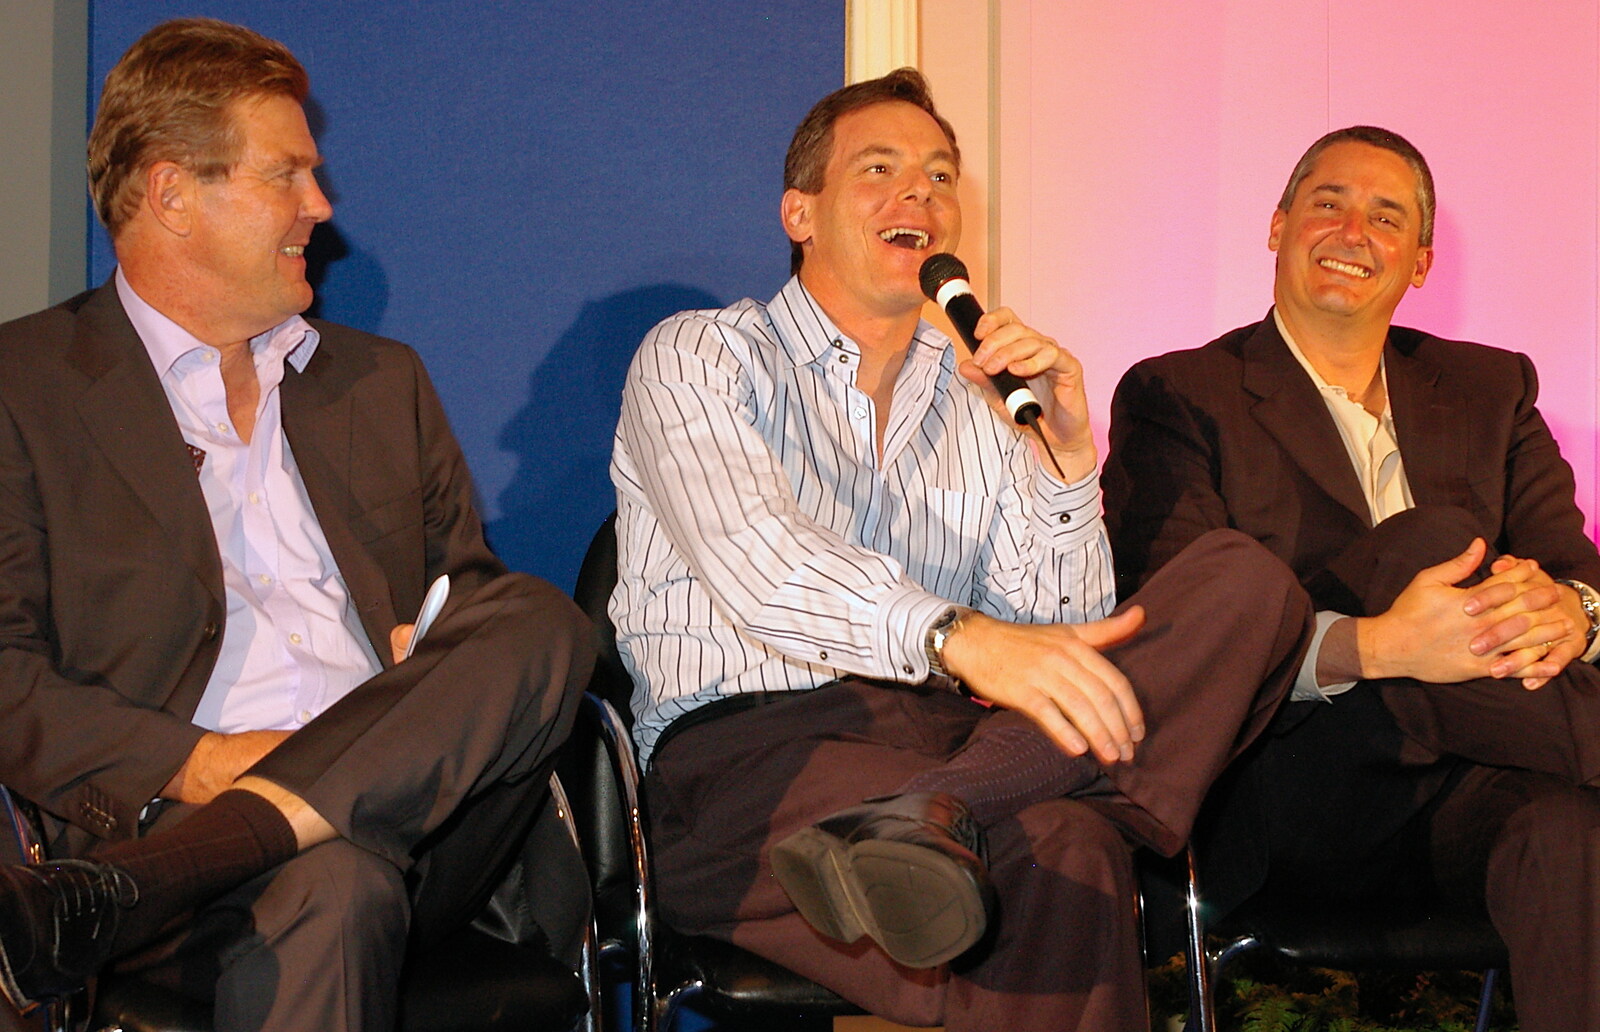 There's a Q&A session from Qualcomm Europe All-Hands at the Berkeley Hotel, London - 9th November 2005